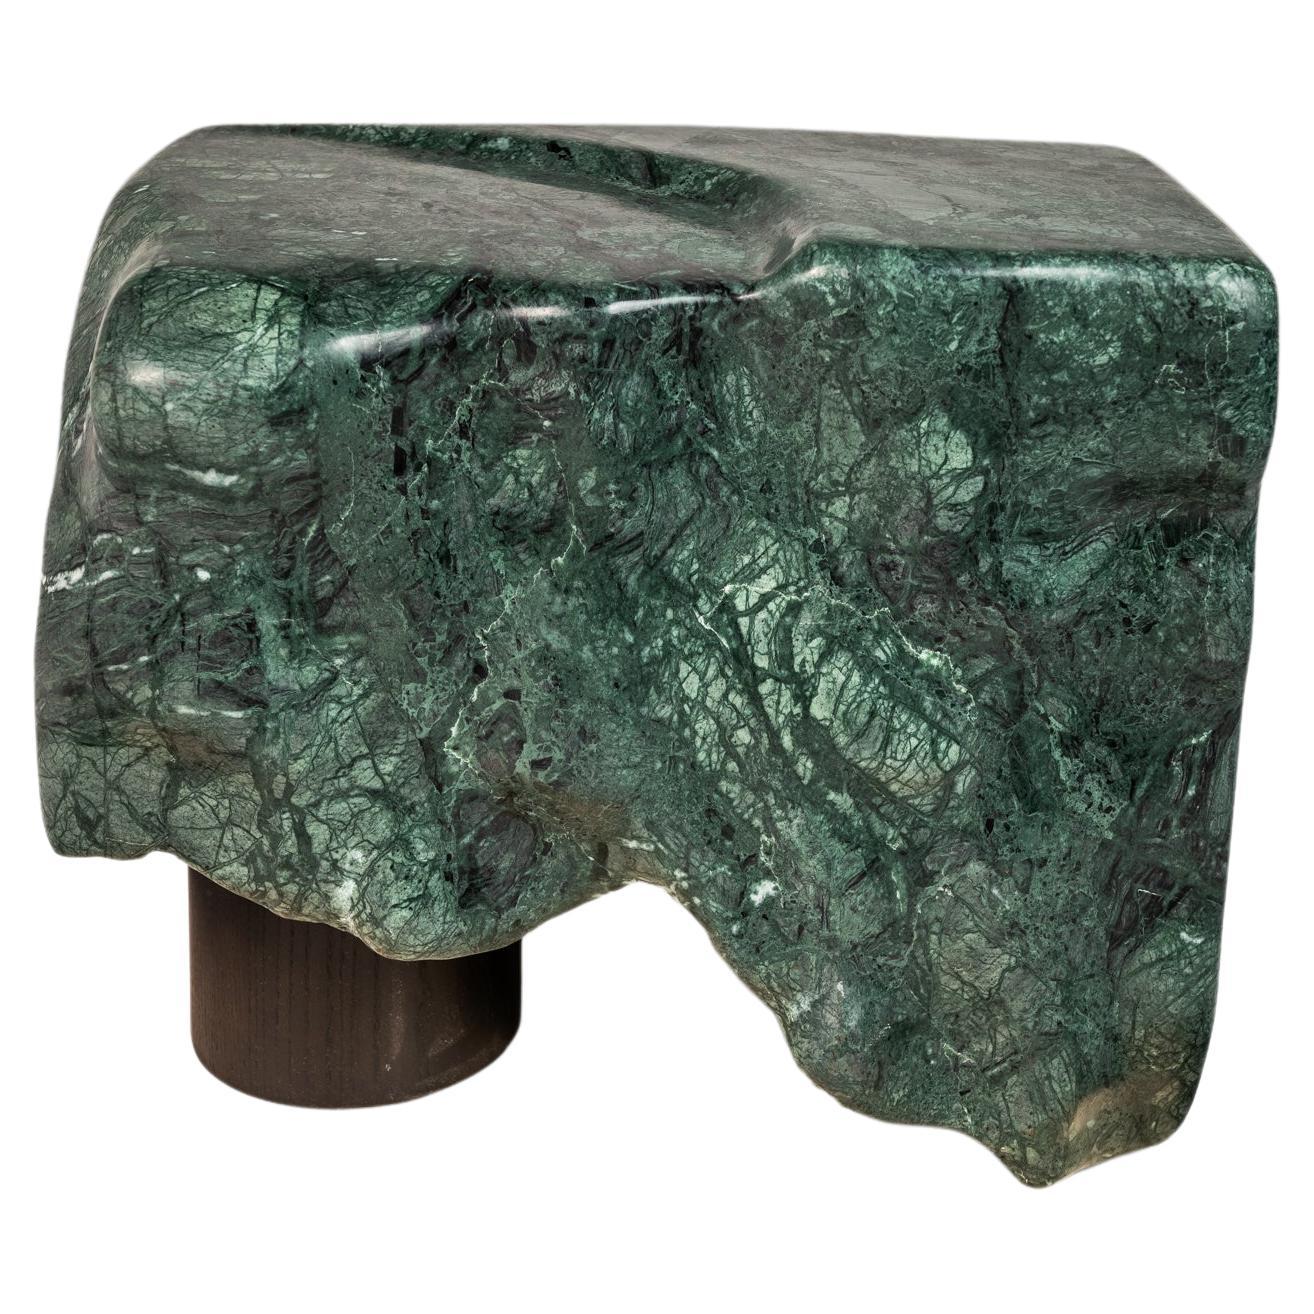 Green Marble Abstract Organic Modern Sculpture by Mark Leblanc, USA, 2000's